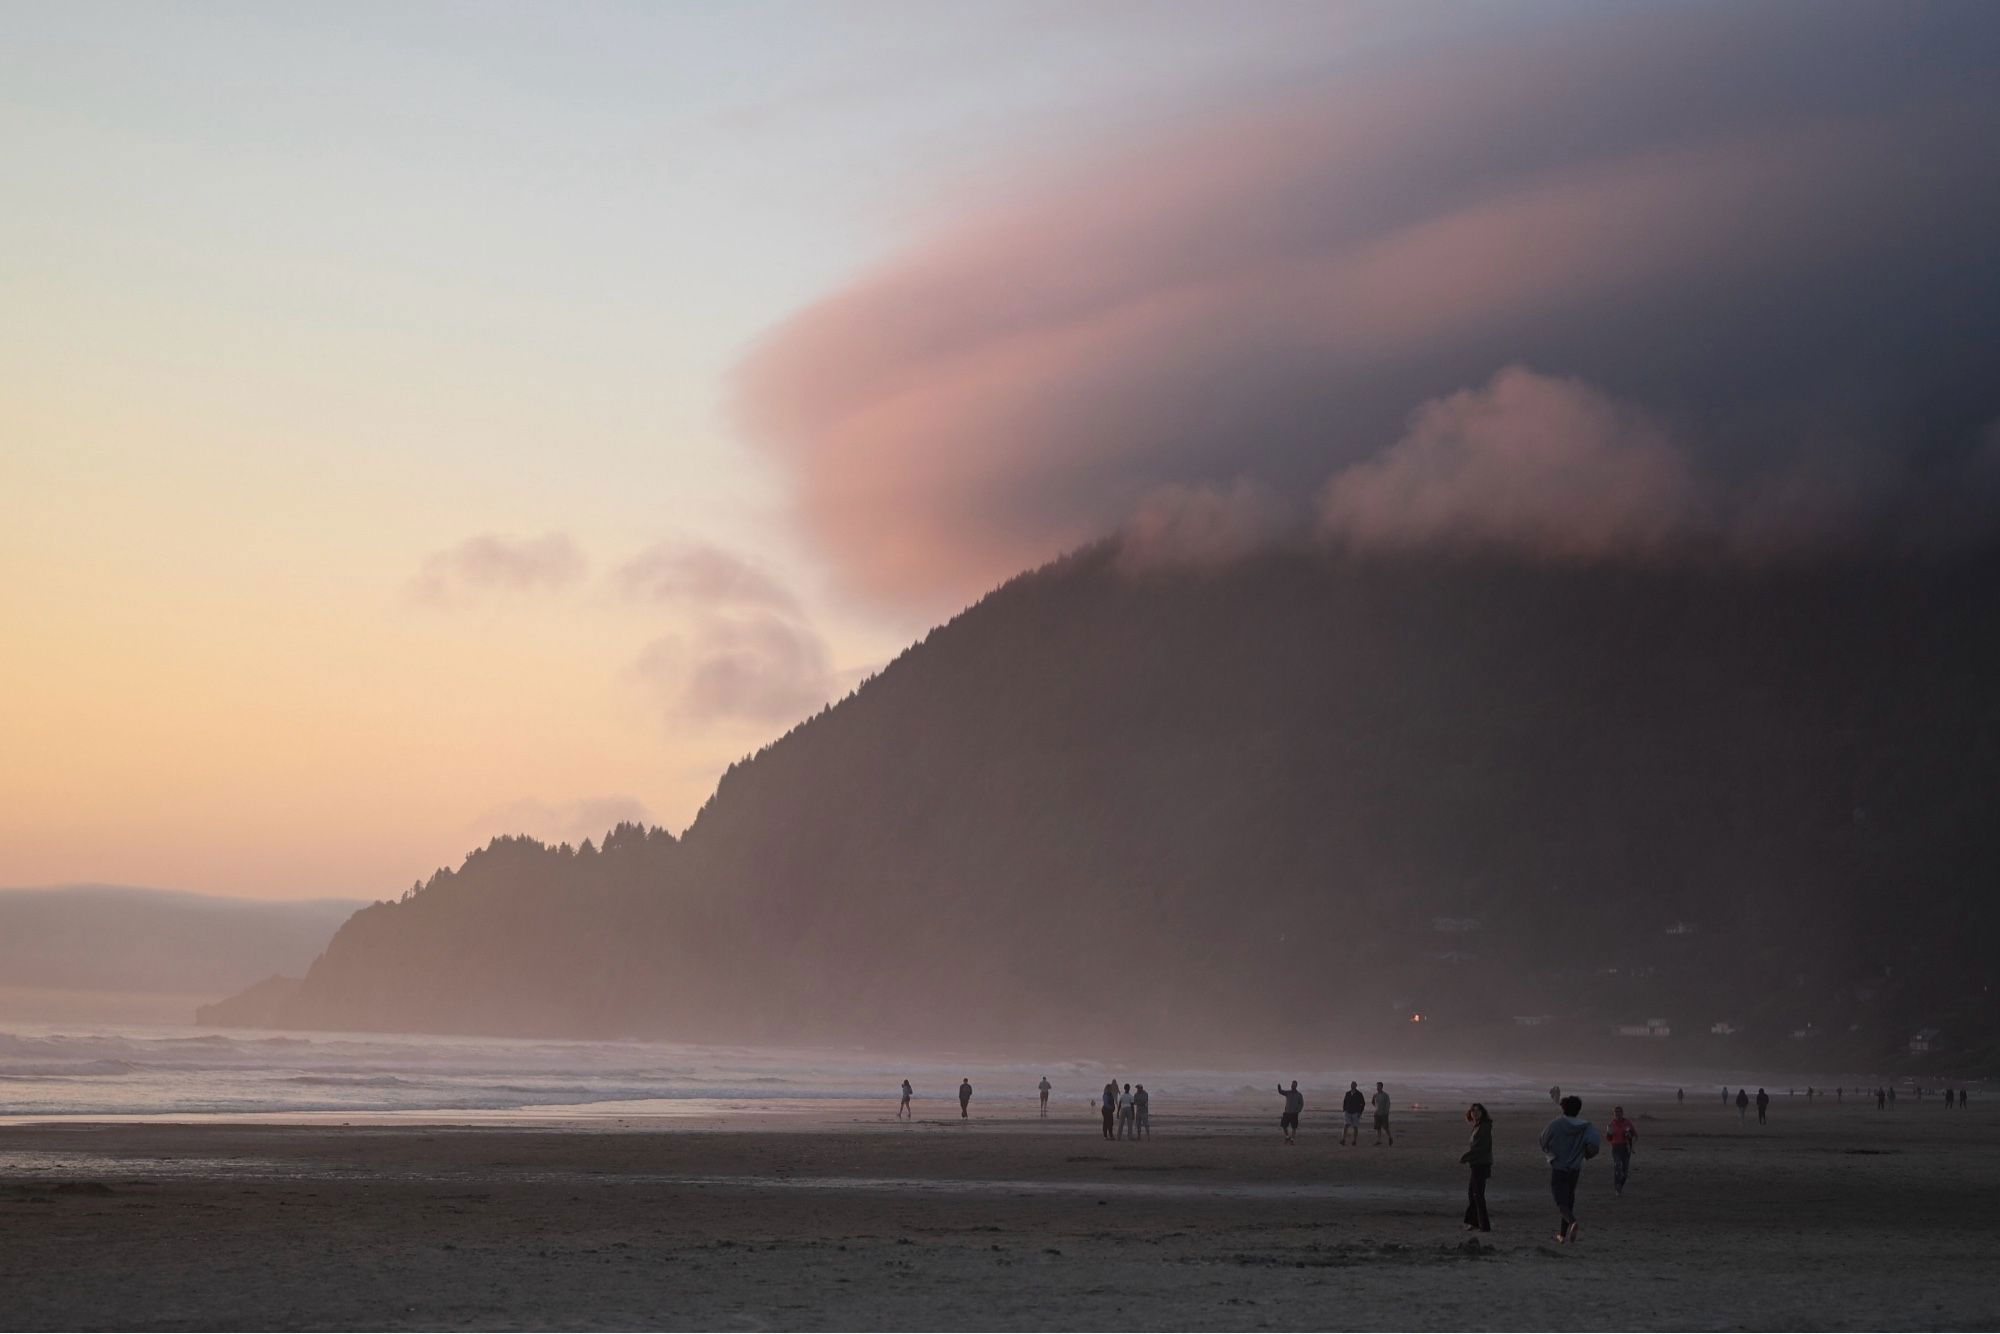 Evening beach scene with a misty mountain in the background, people walking on the sand, and soft twilight colors in the sky.